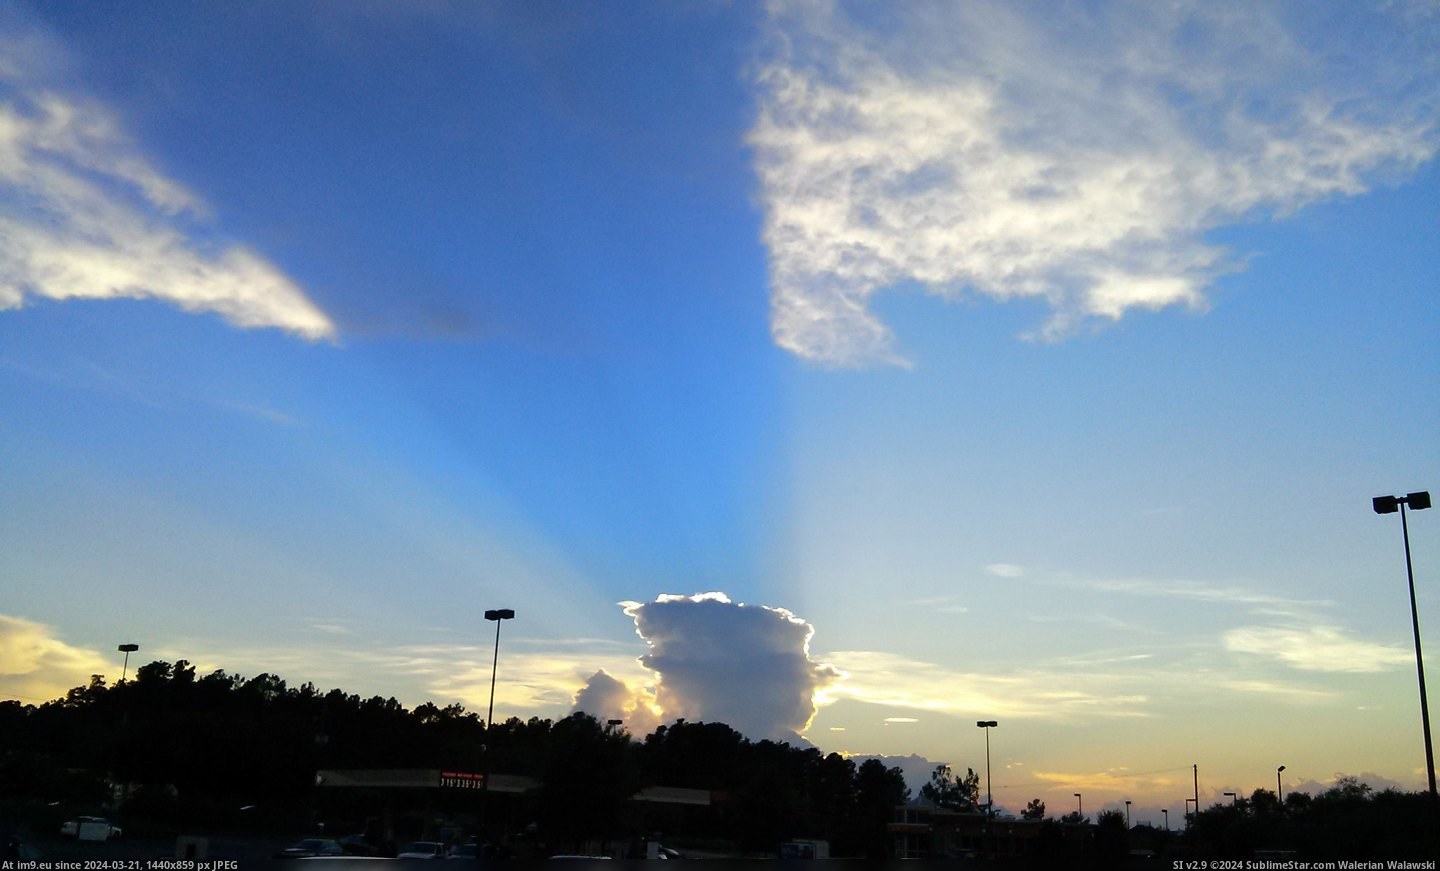 #Sun #Cloud #Halves #Rays #Cuts [Mildlyinteresting] The cloud in the middle cuts the sun's rays that then cuts the cloud ahead of it into halves Pic. (Image of album My r/MILDLYINTERESTING favs))